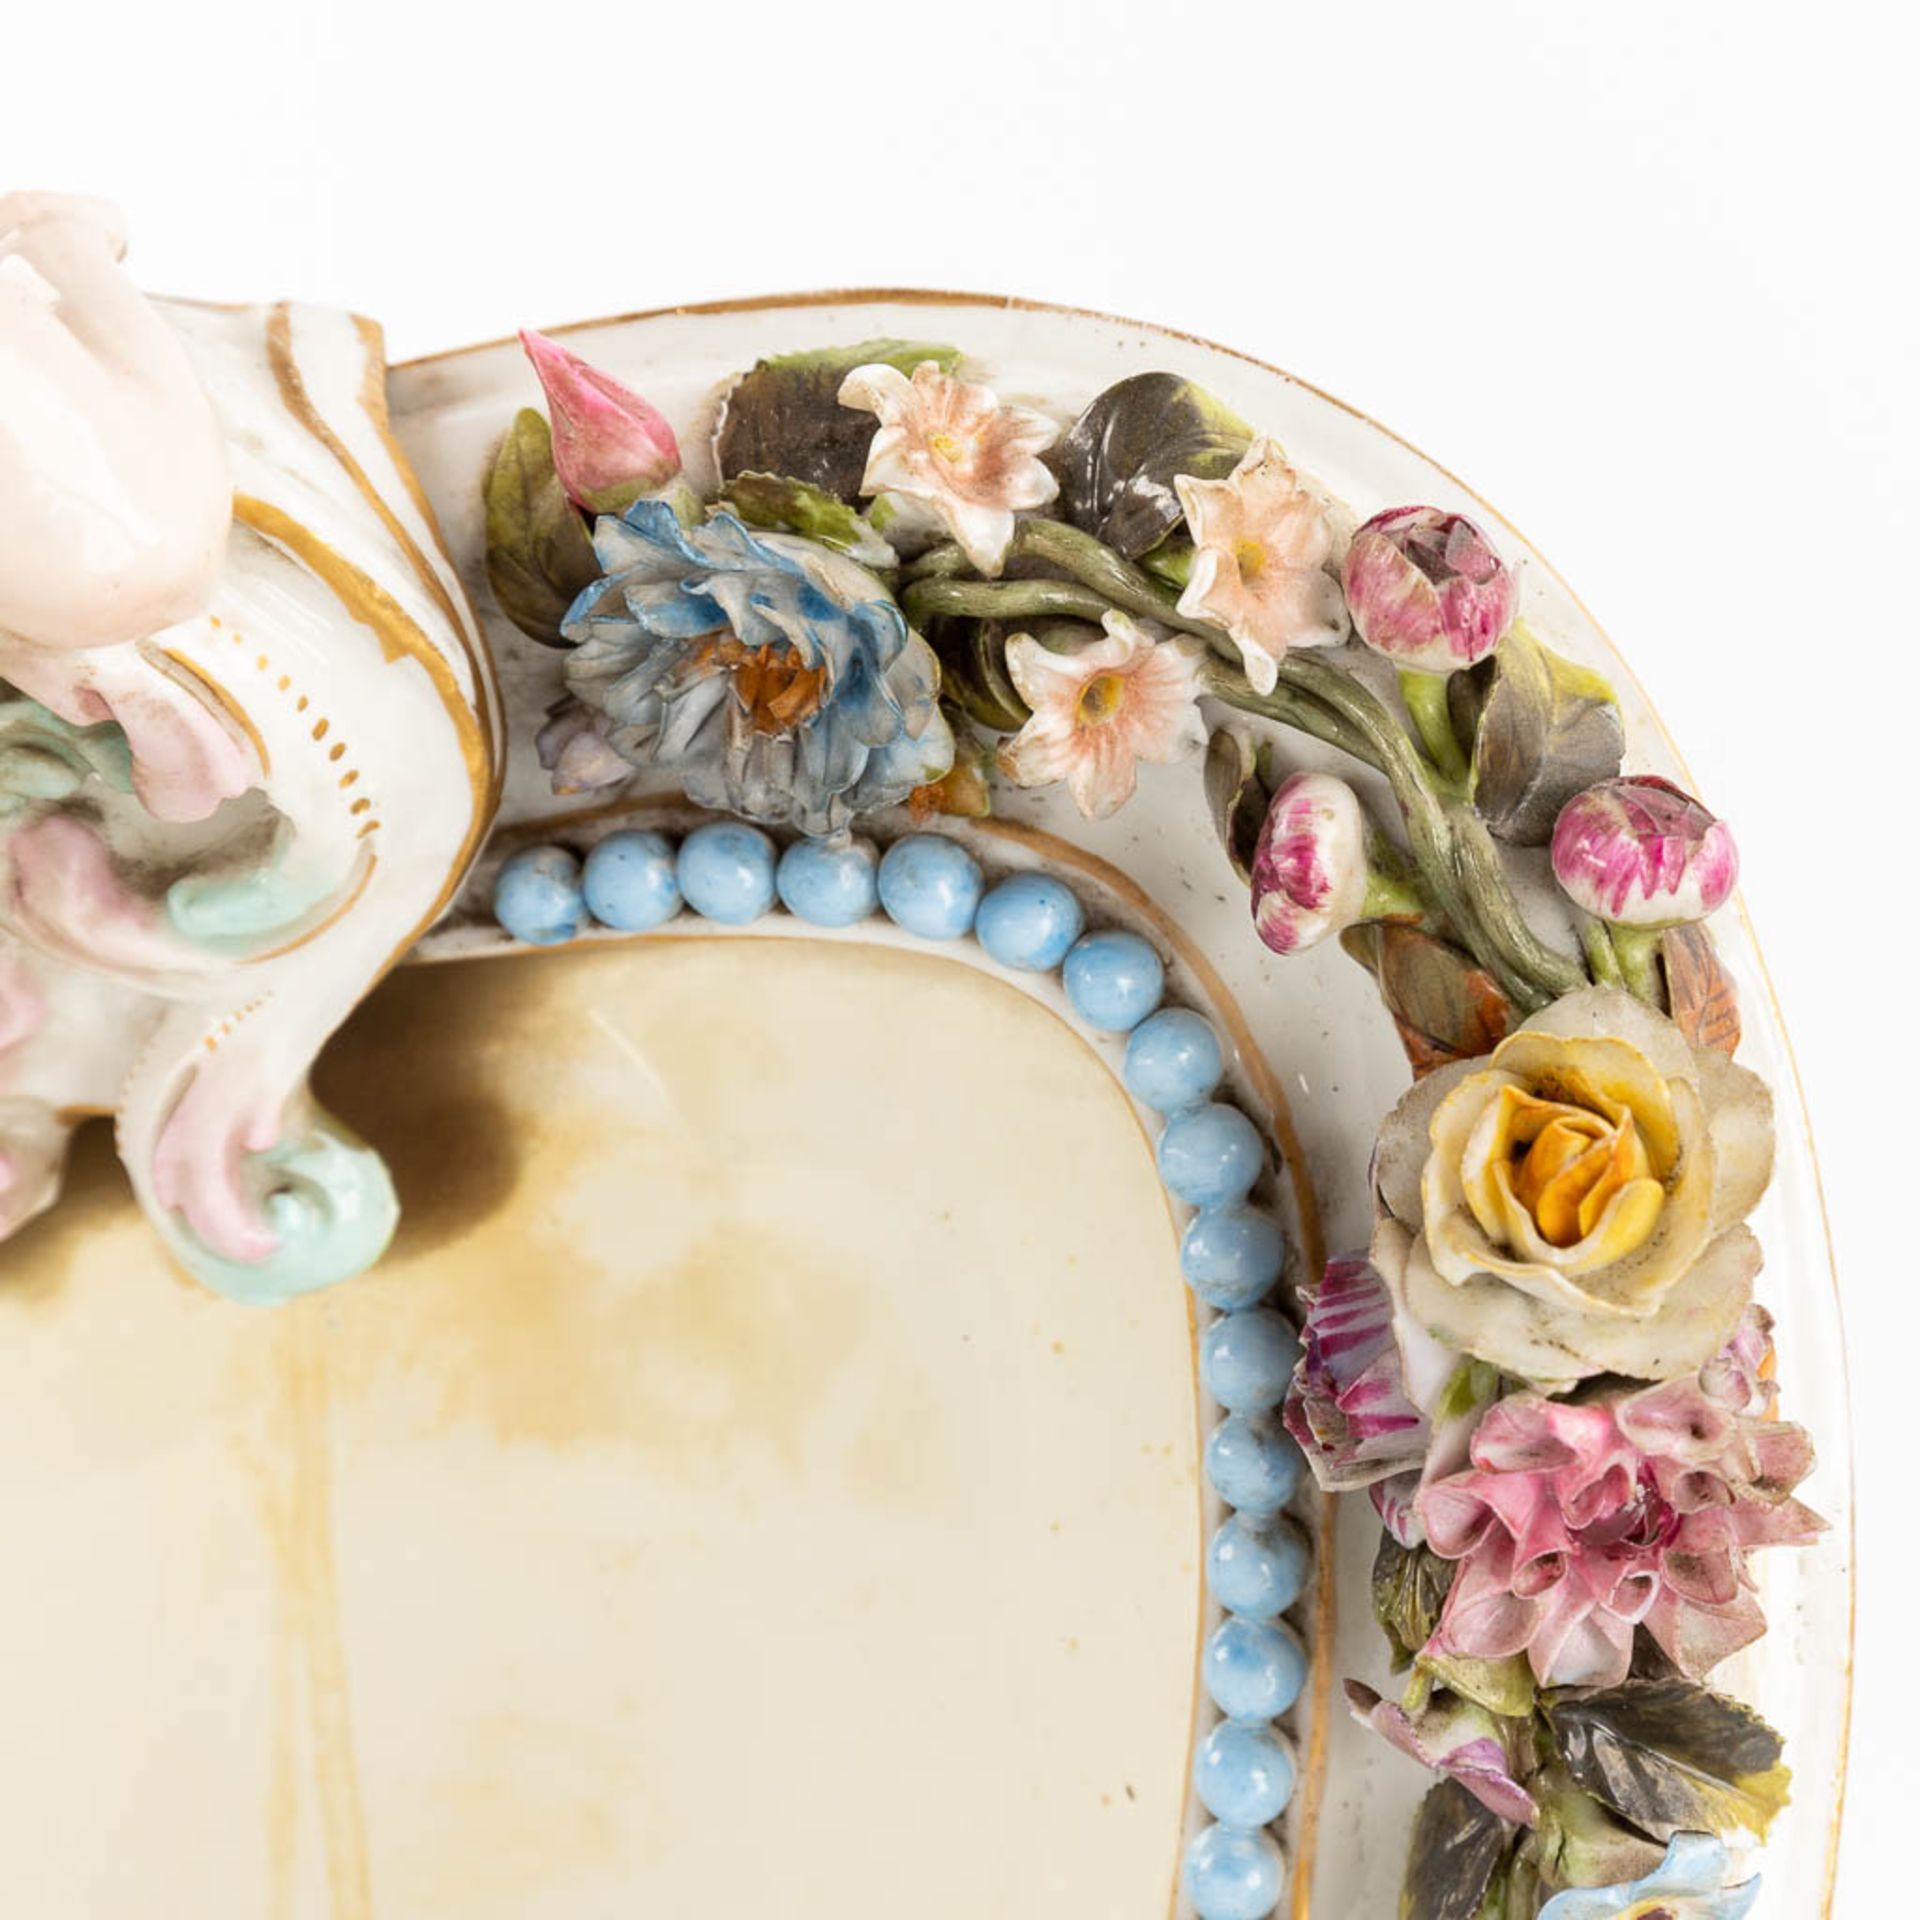 JACOB-PETIT (1796-1868) 'Table Mirror' made of porcelain. 19th C. (W:38 x H:51 cm) - Image 12 of 19